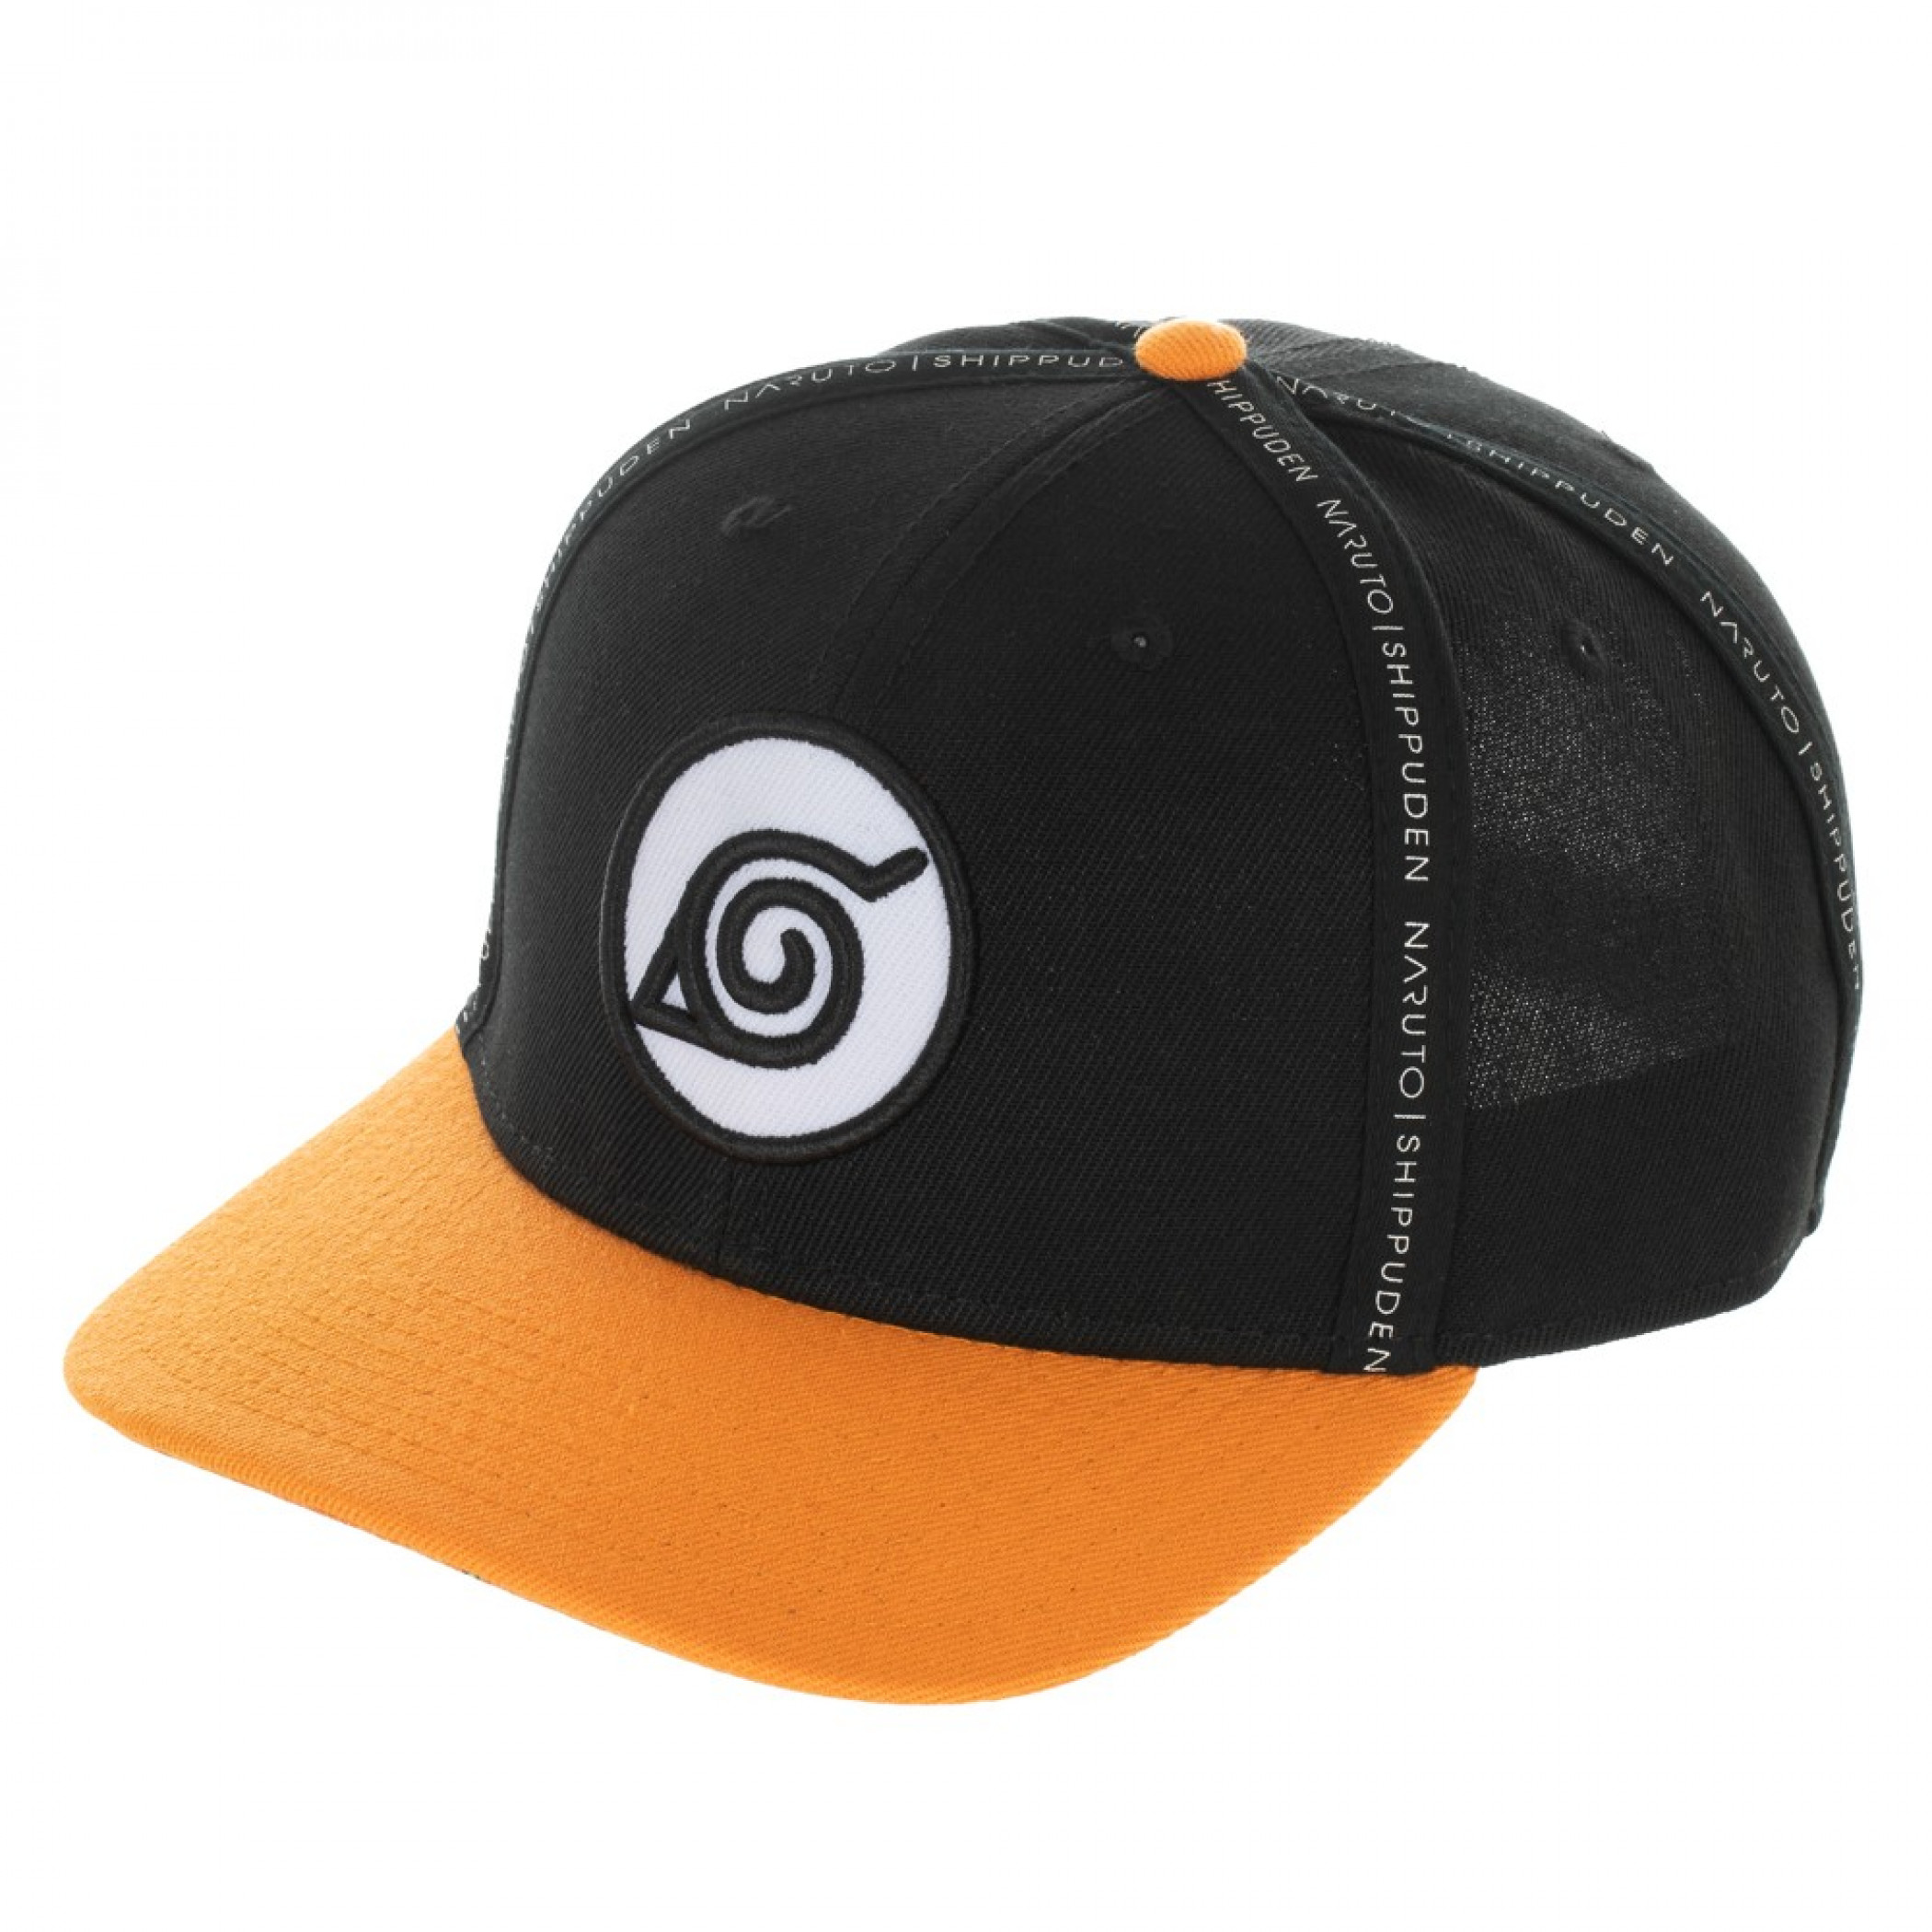 Naruto: Shippuden Taping Pre-Curved Adjustable Snapback Hat